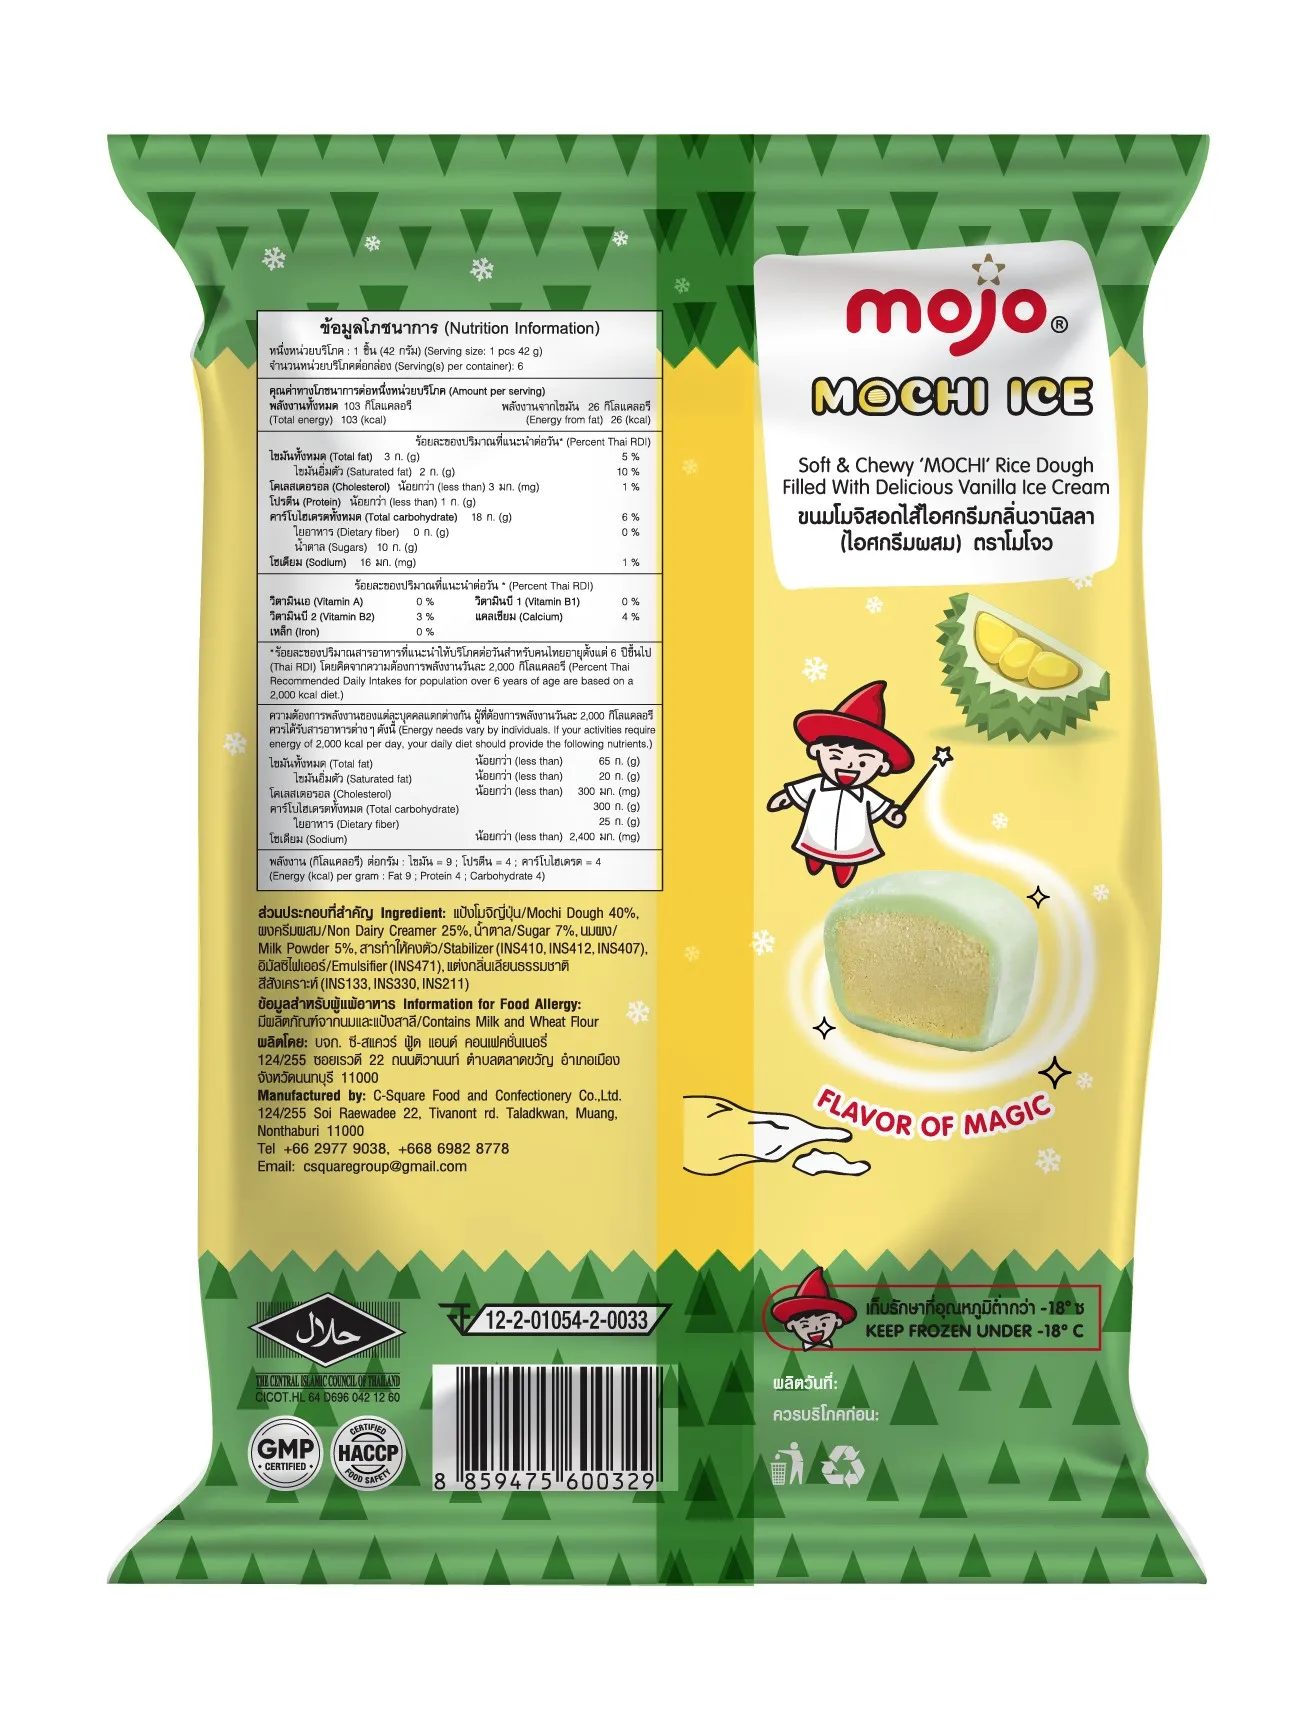 High Ingredient by King fruit of Thailand MOJO Mochi Ice Cream Durian